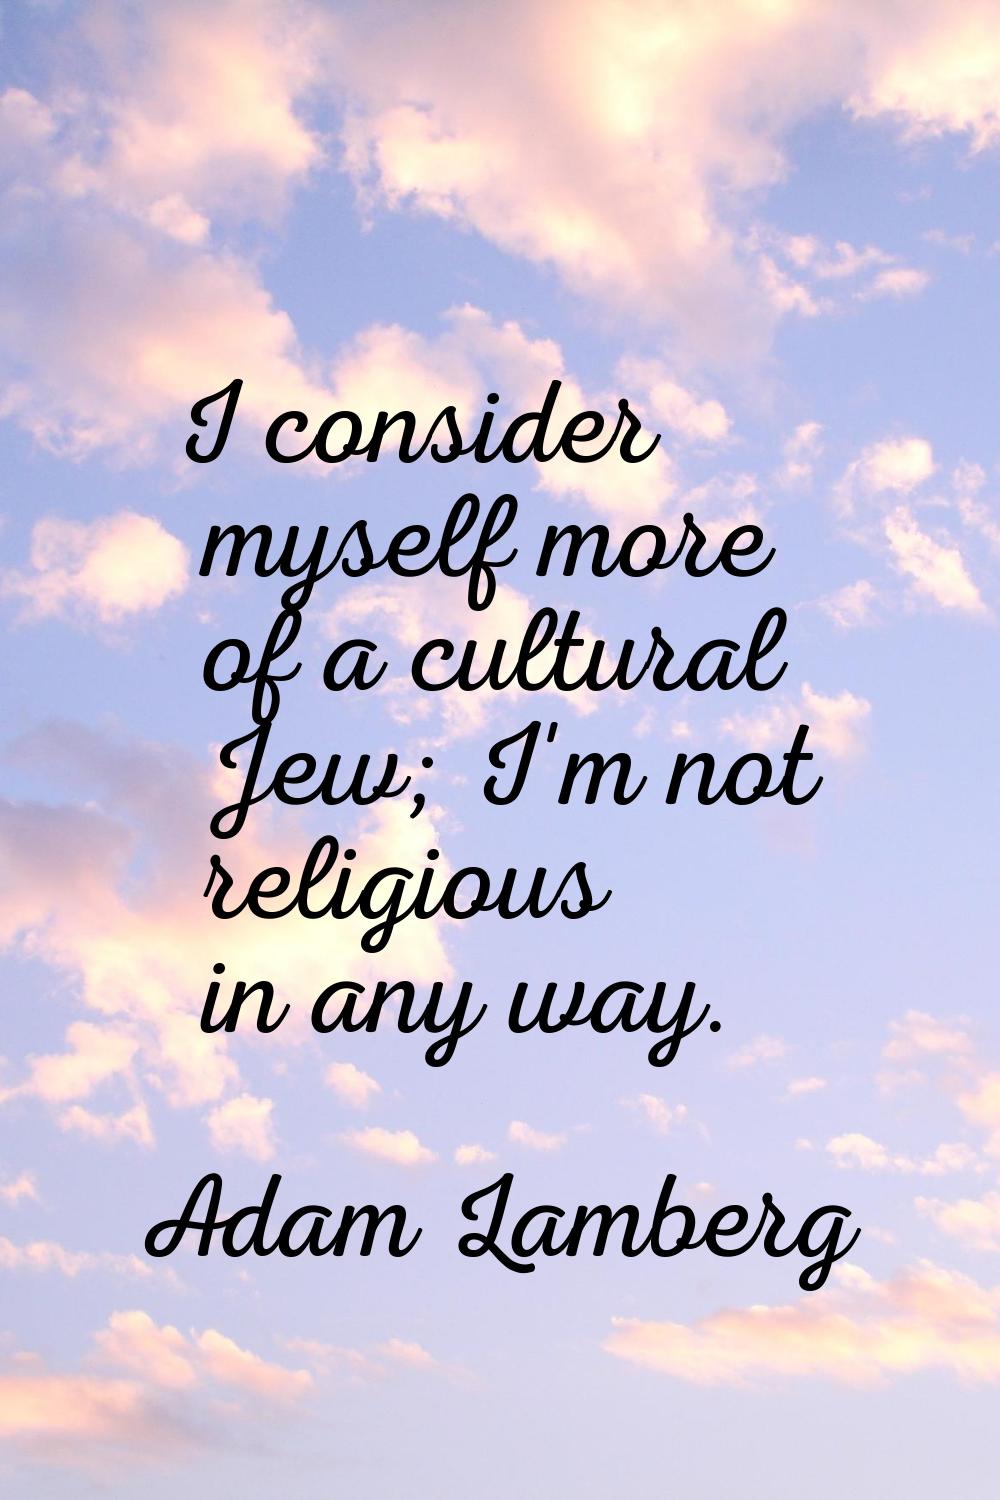 I consider myself more of a cultural Jew; I'm not religious in any way.